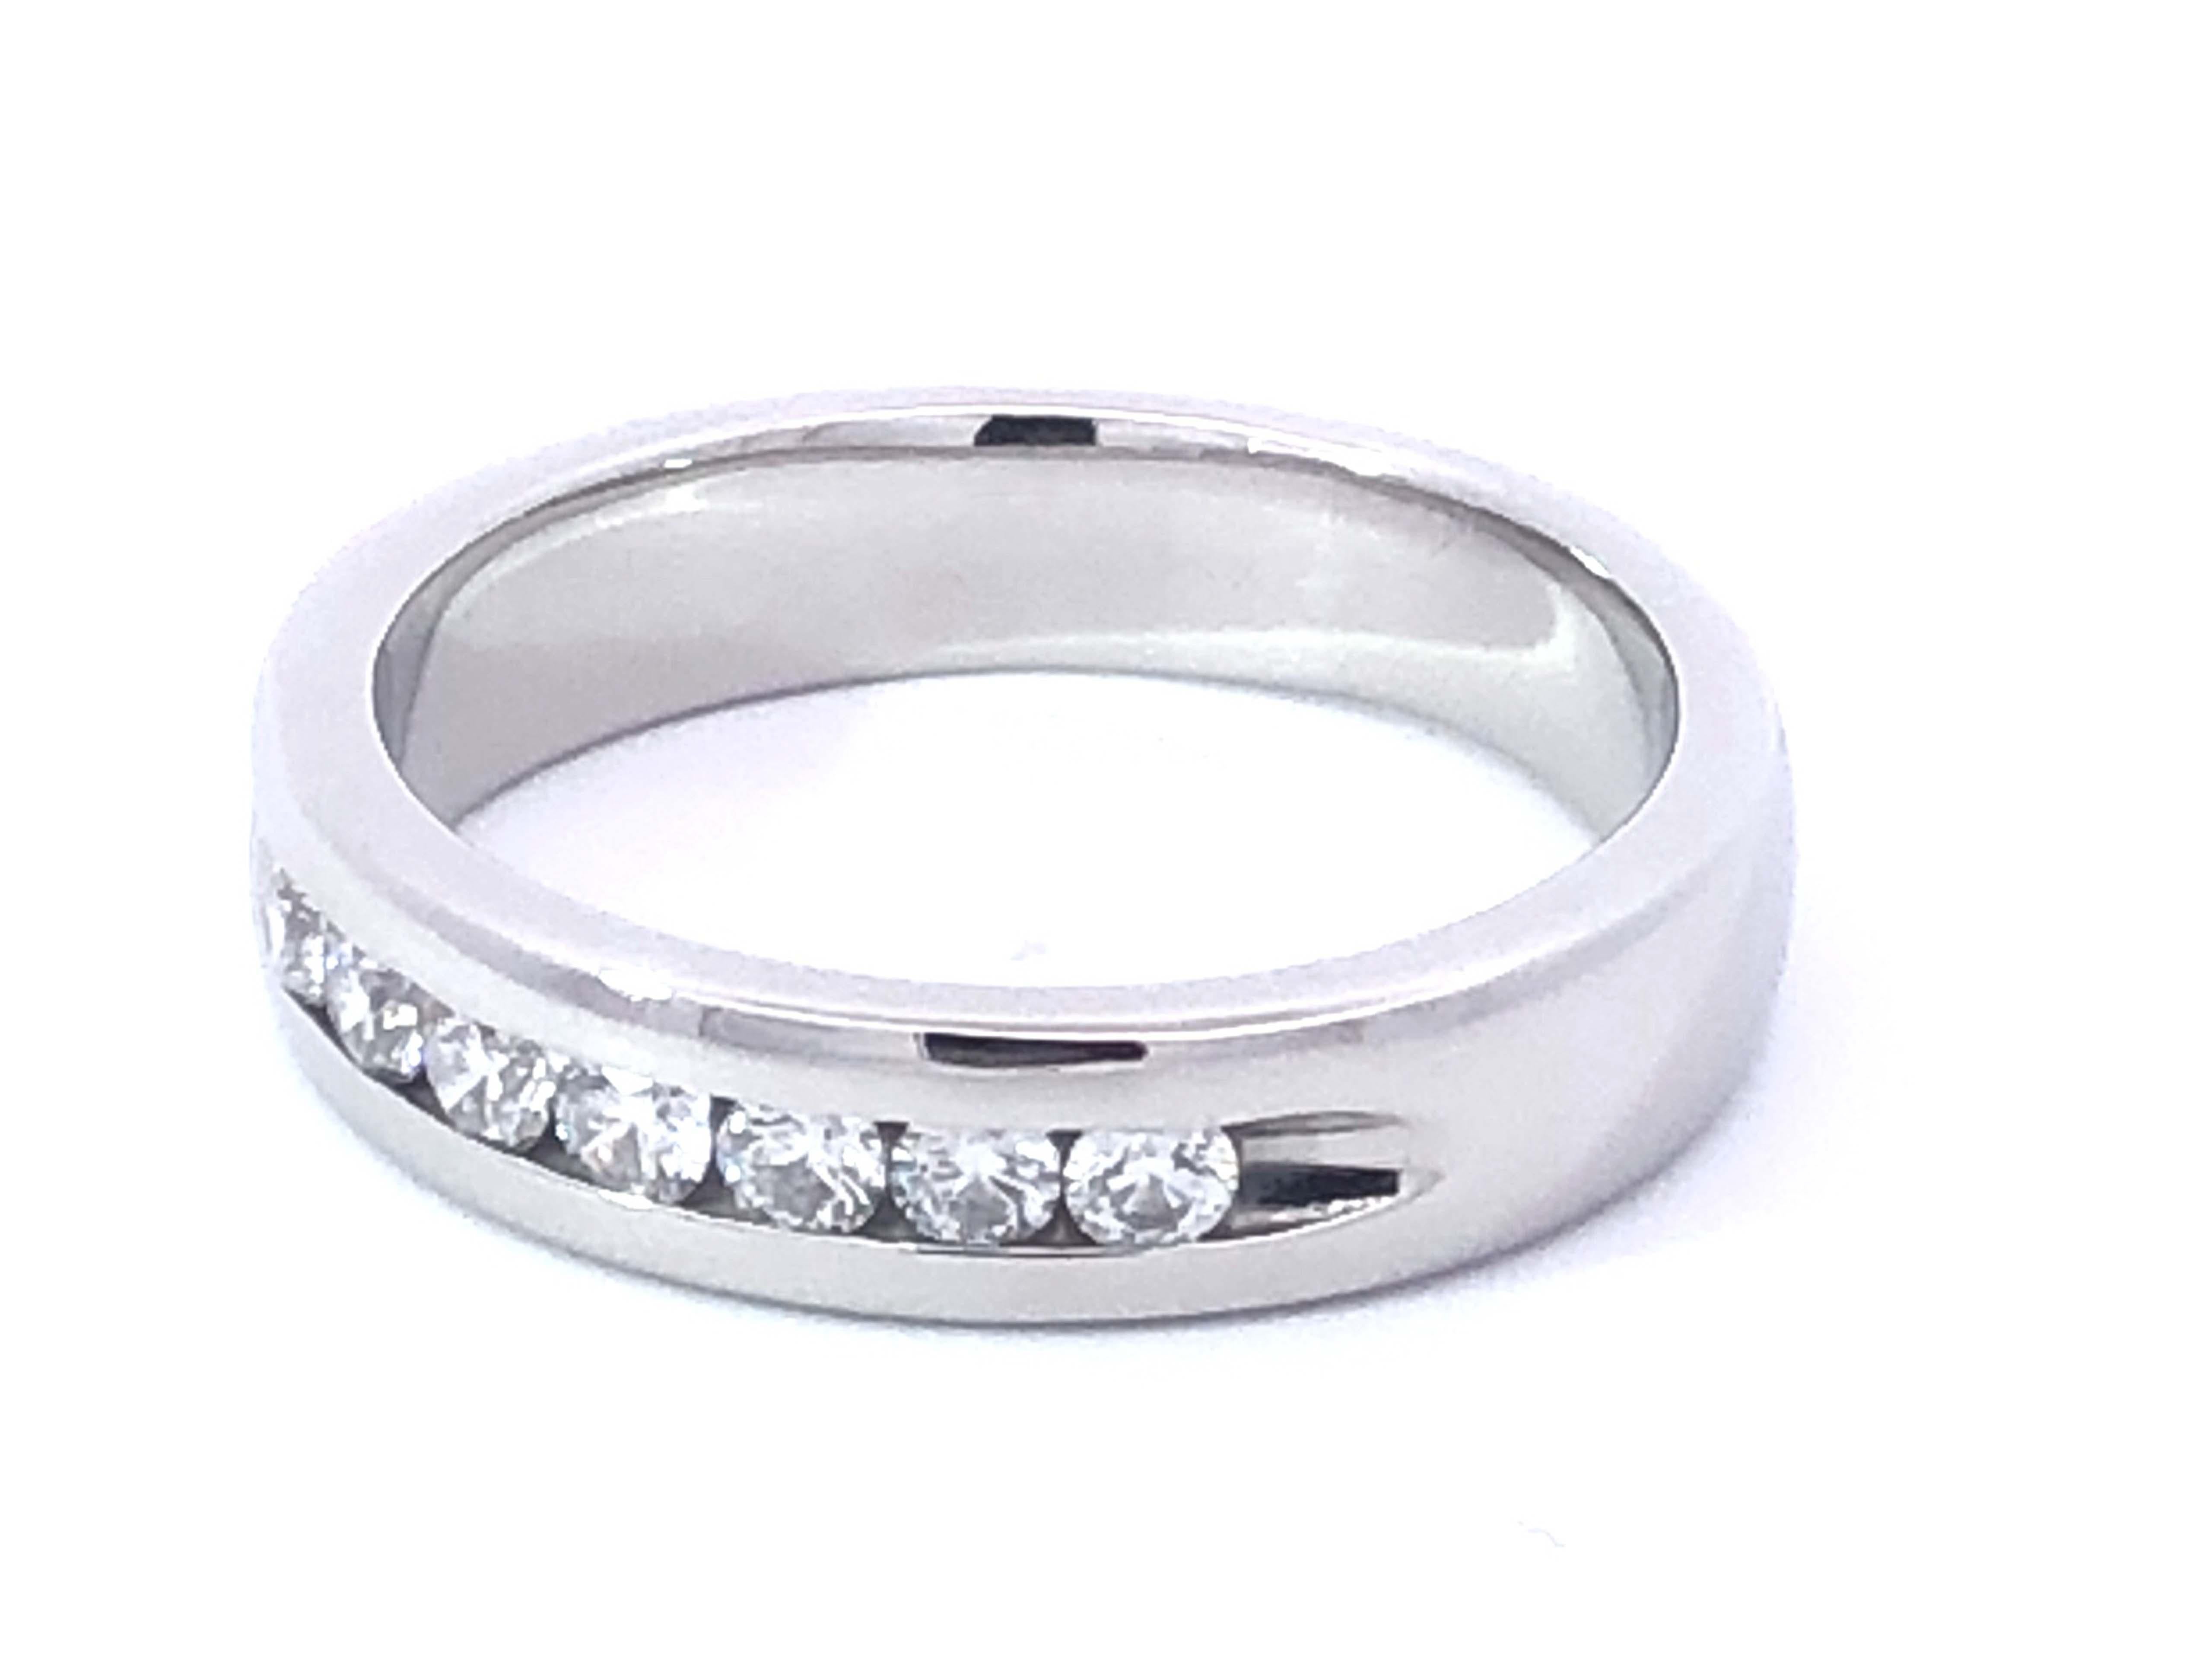 7 Diamond Channel Set Platinum Wedding Band Ring In Excellent Condition For Sale In Honolulu, HI